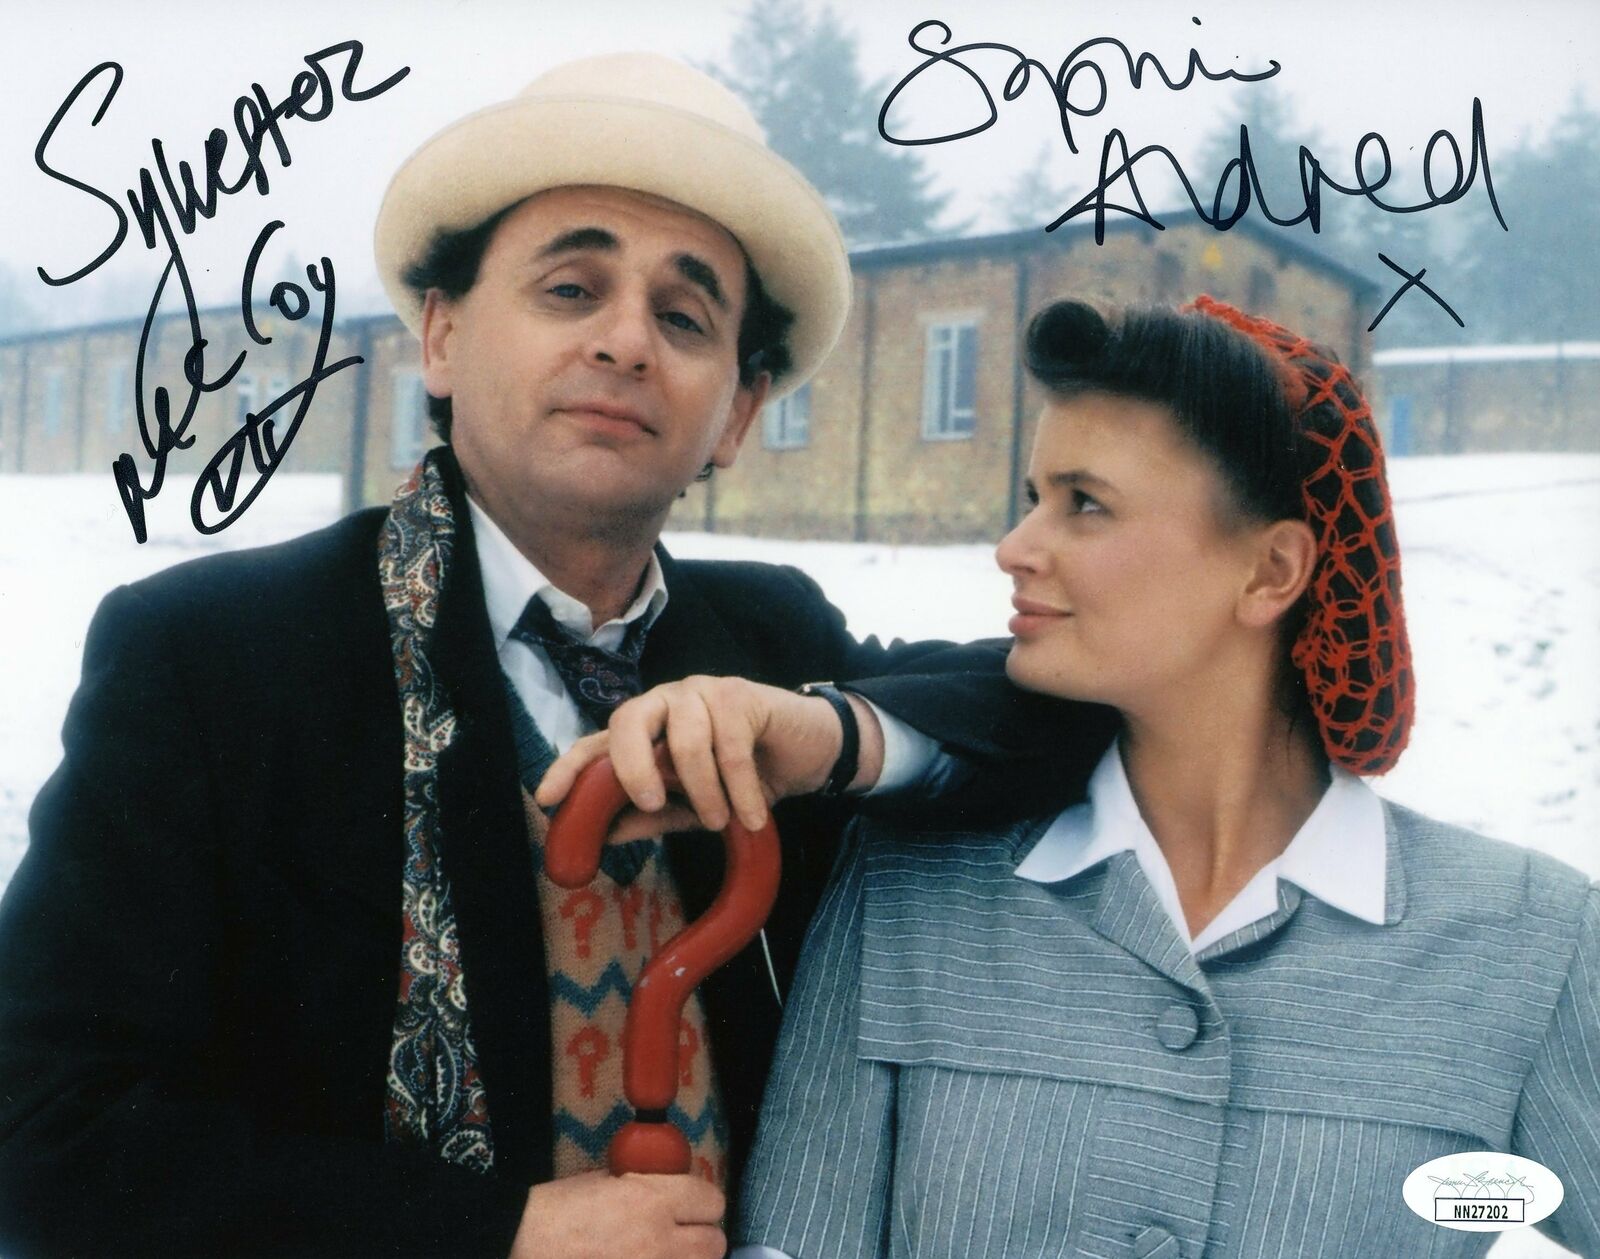 Doctor Who 8x10 Photo Poster painting Signed Autographed Aldred McCoy JSA Certified COA Auto